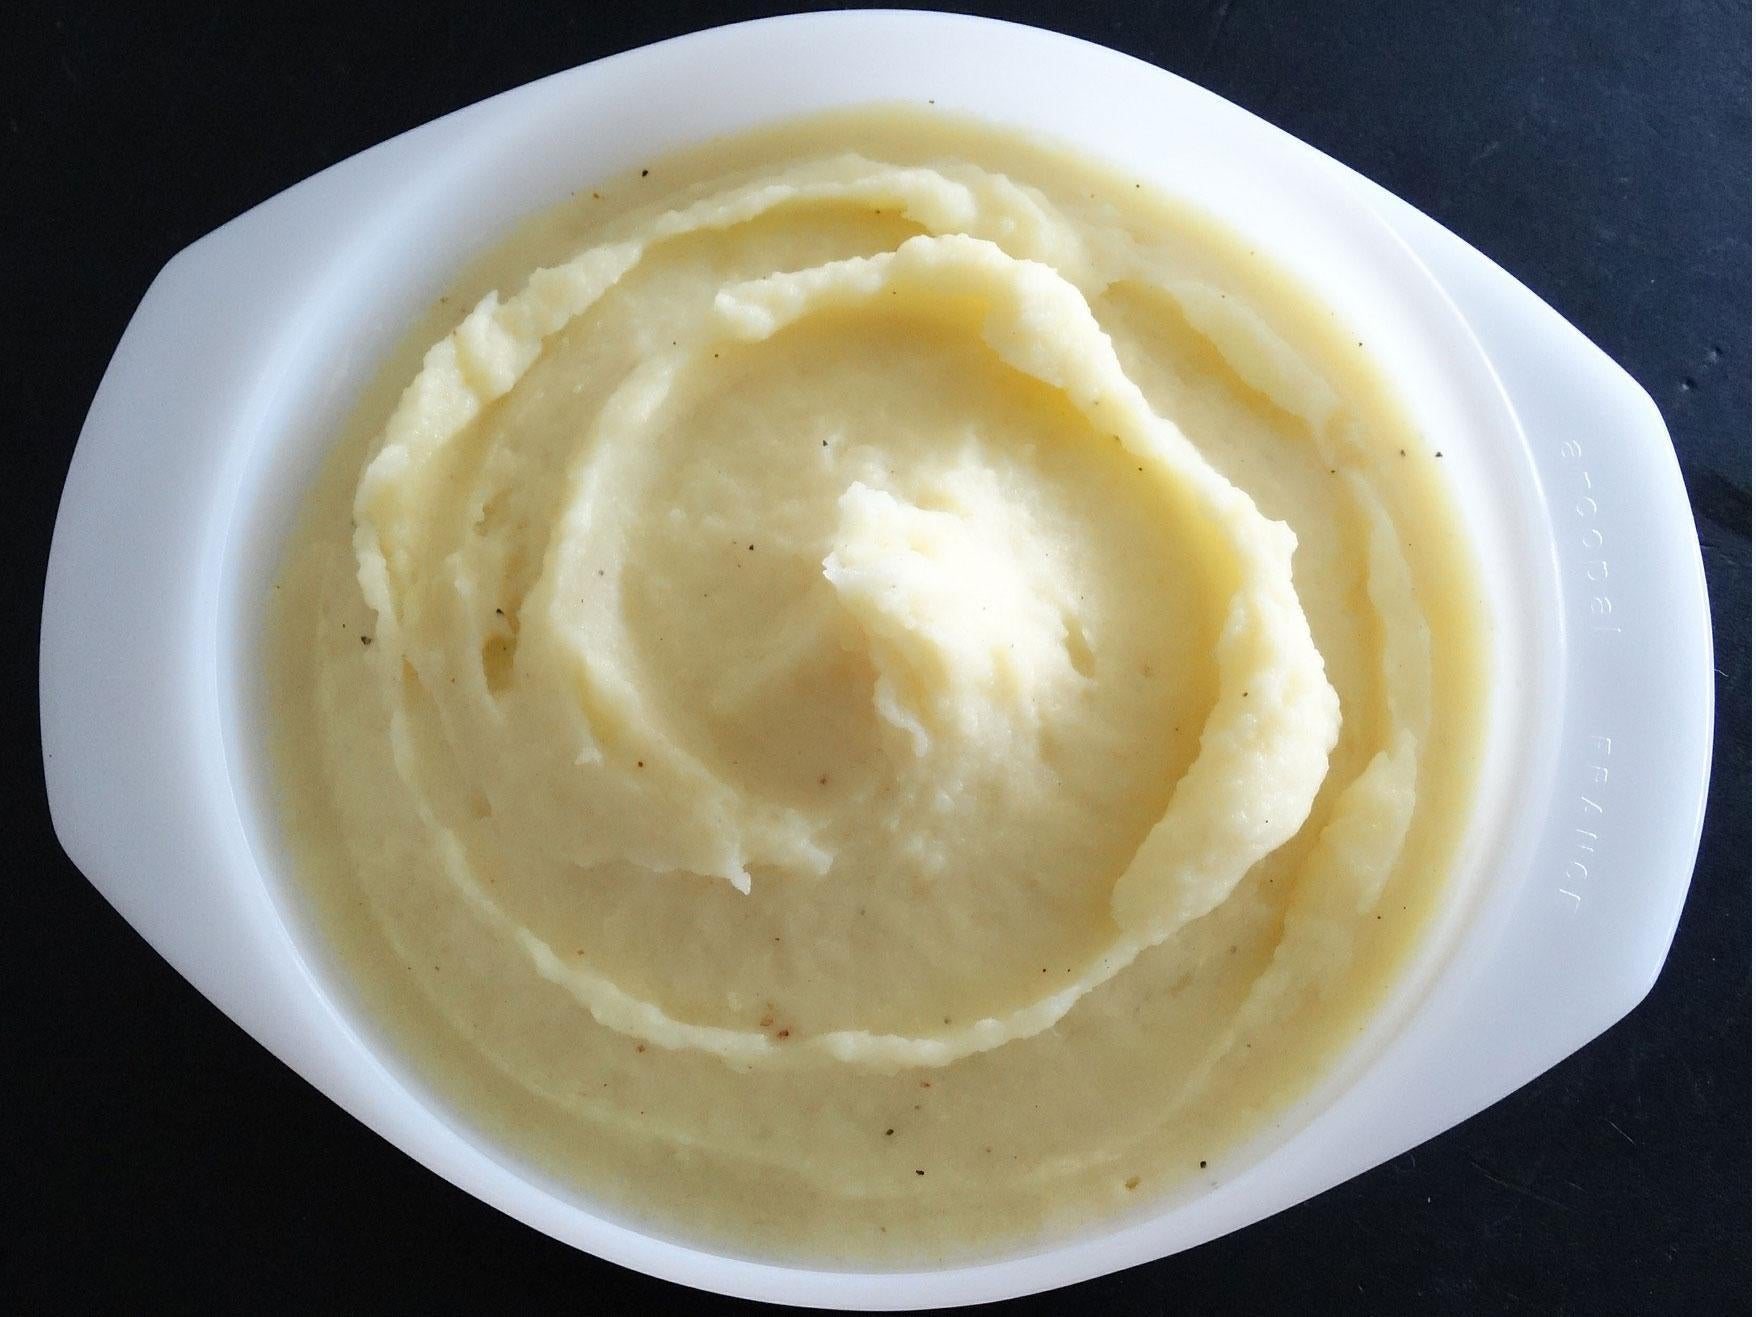 New York Times mocked for ‘two-ingredient’ mashed potato recipe – with four ingredients